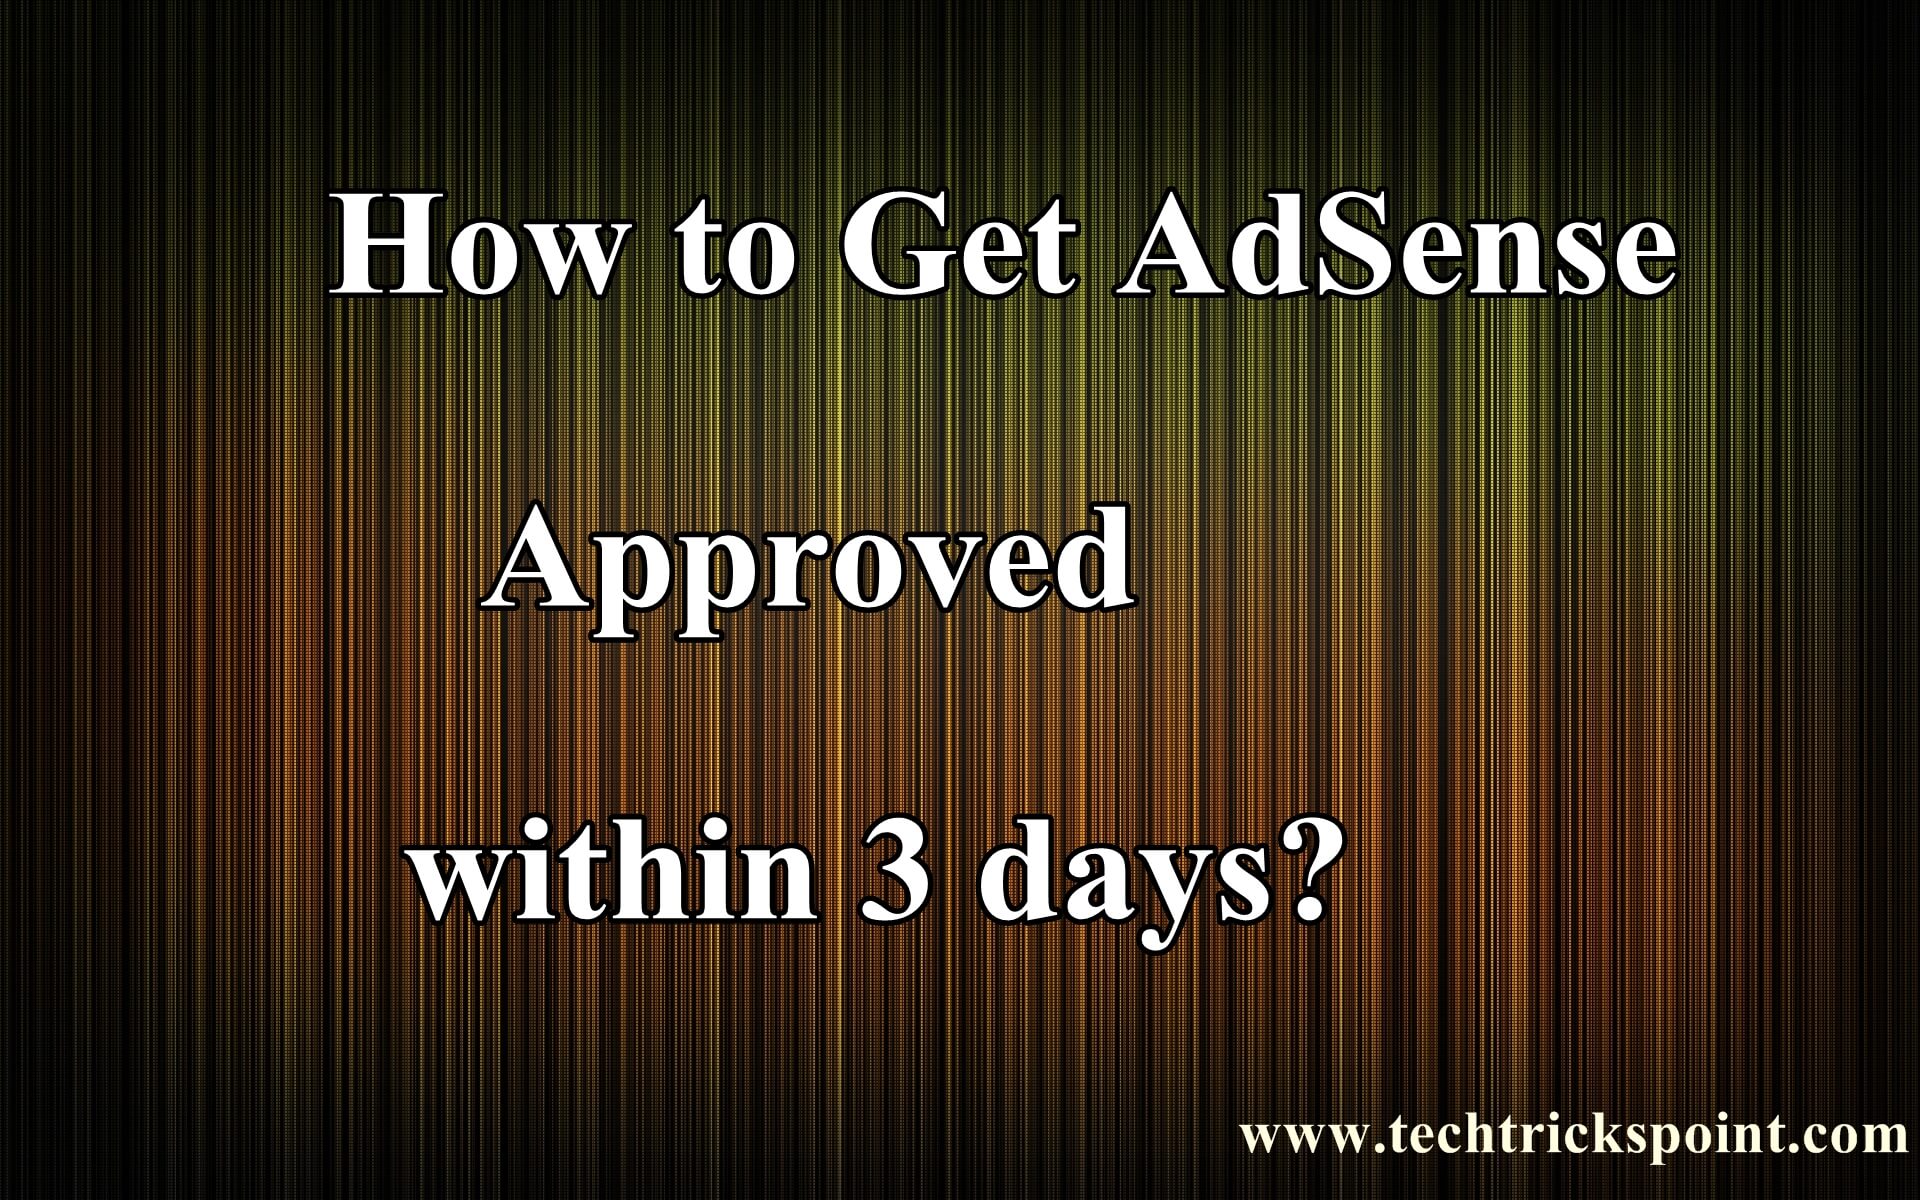 How to Get AdSense Approved within 3 days?